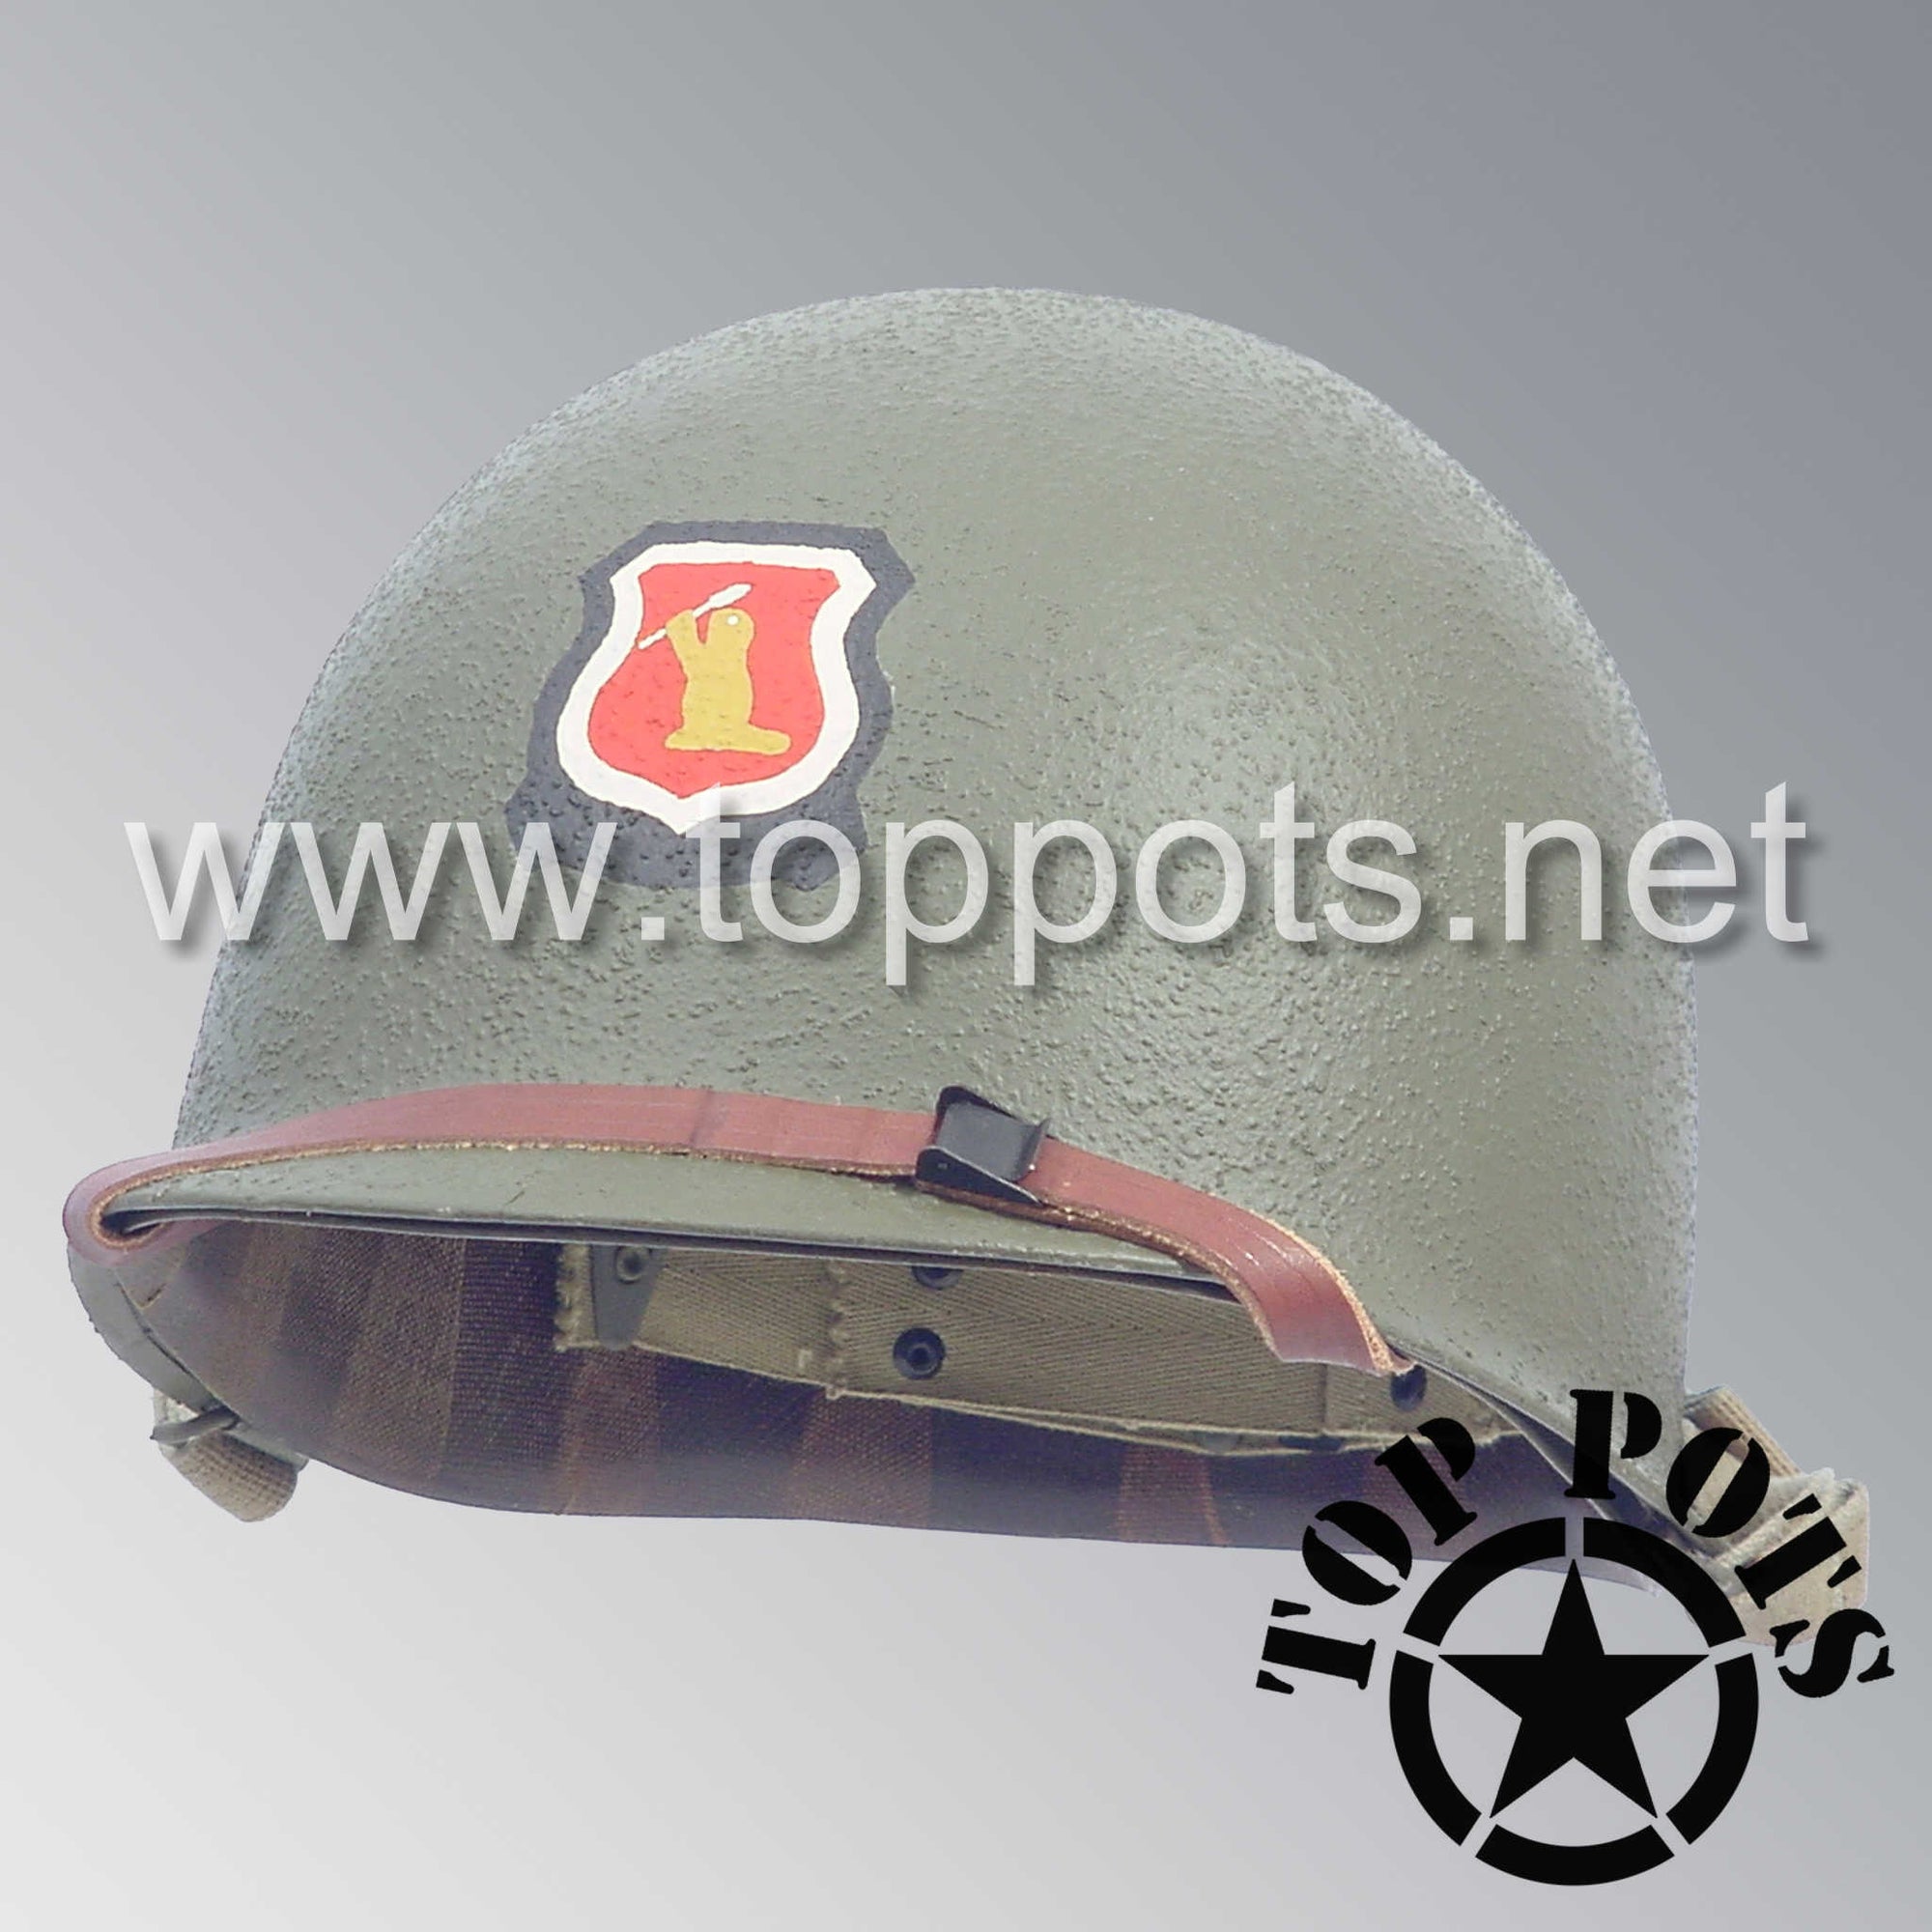 WWII US Army Restored Original M1 Infantry Helmet Swivel Bale Shell and Liner with 998th Engineer Regiment Emblem